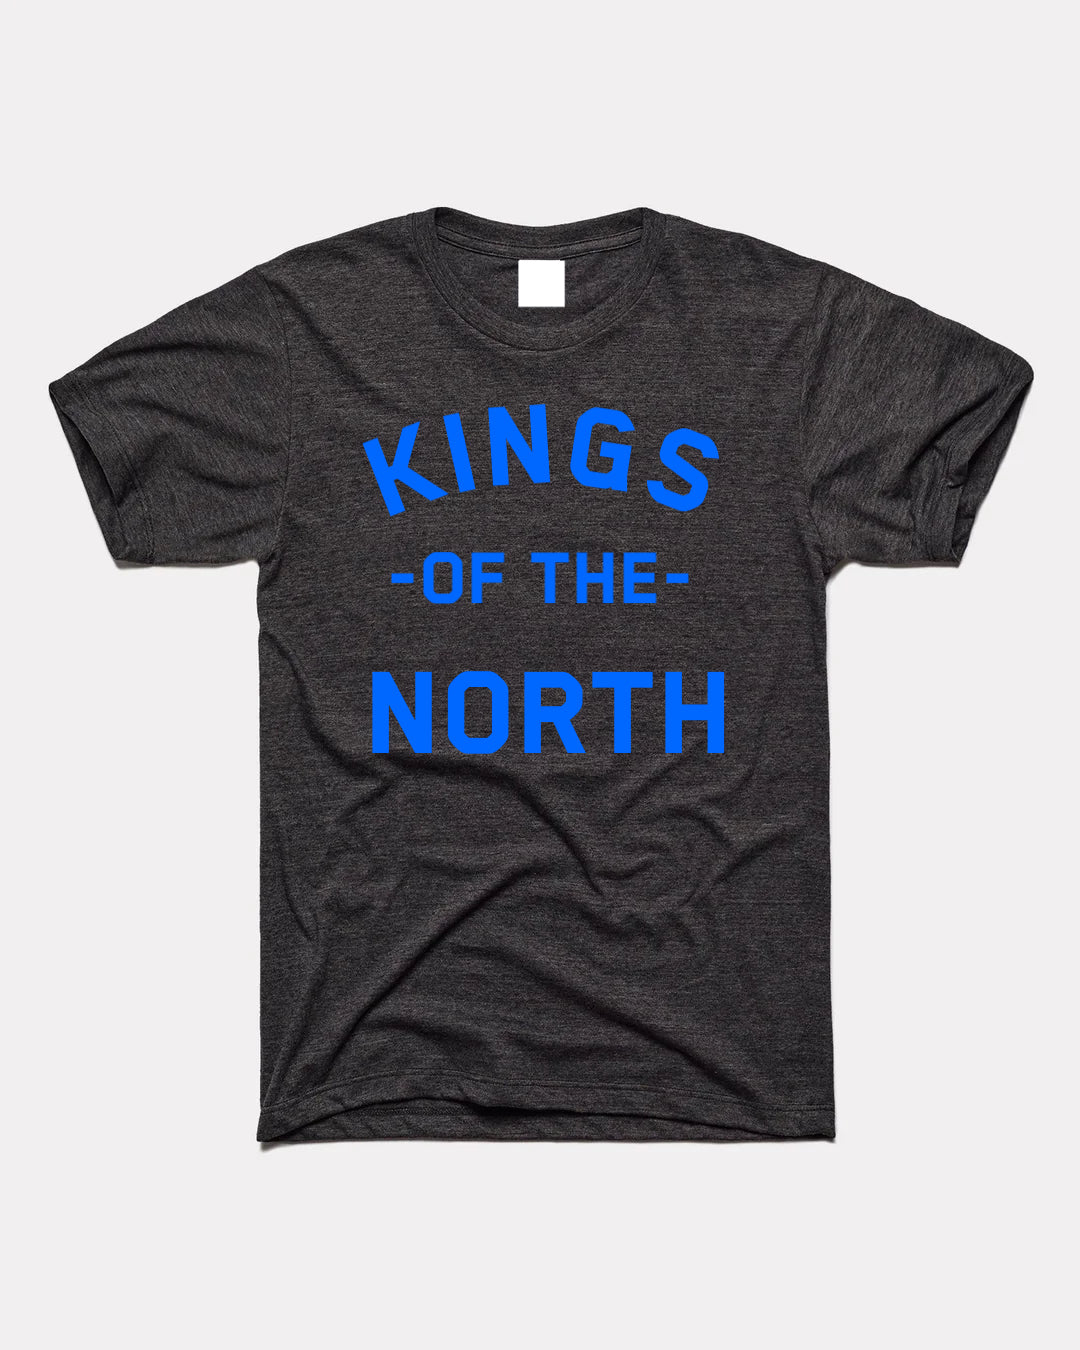 Kings of the North